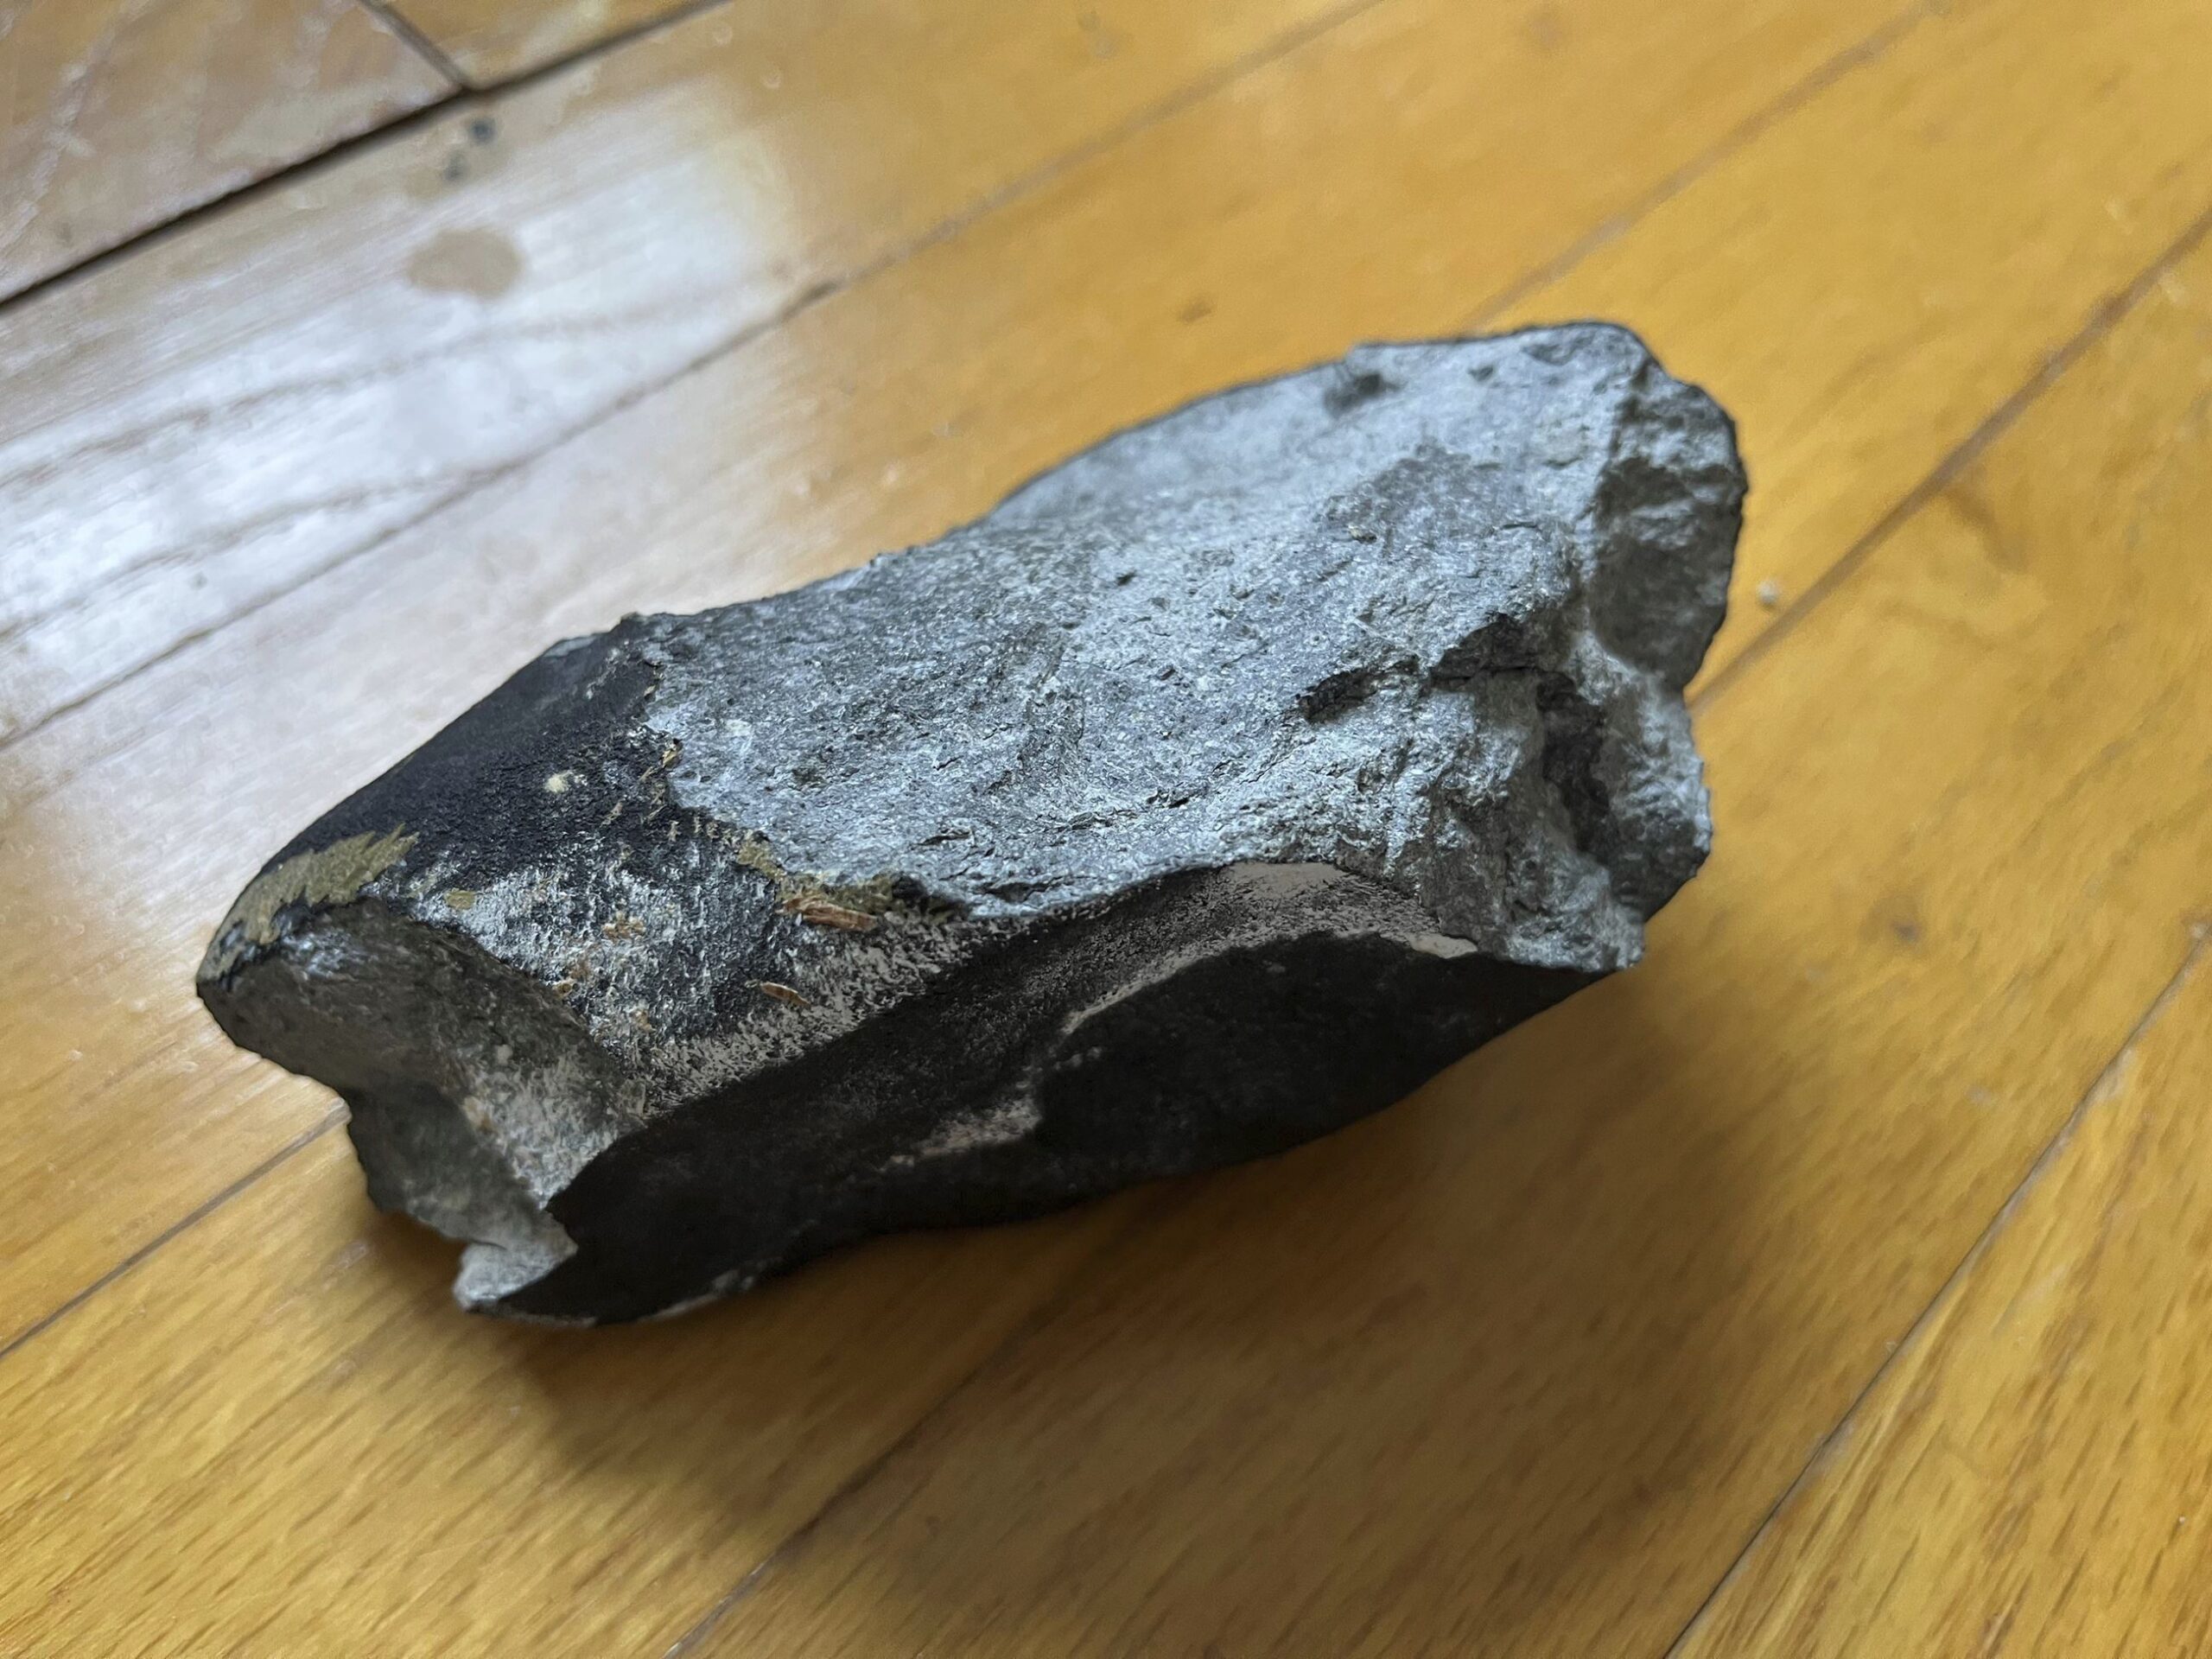 This image provided by Hopewell Township Police Department shows a confirmed meteorite on a hardwoo...